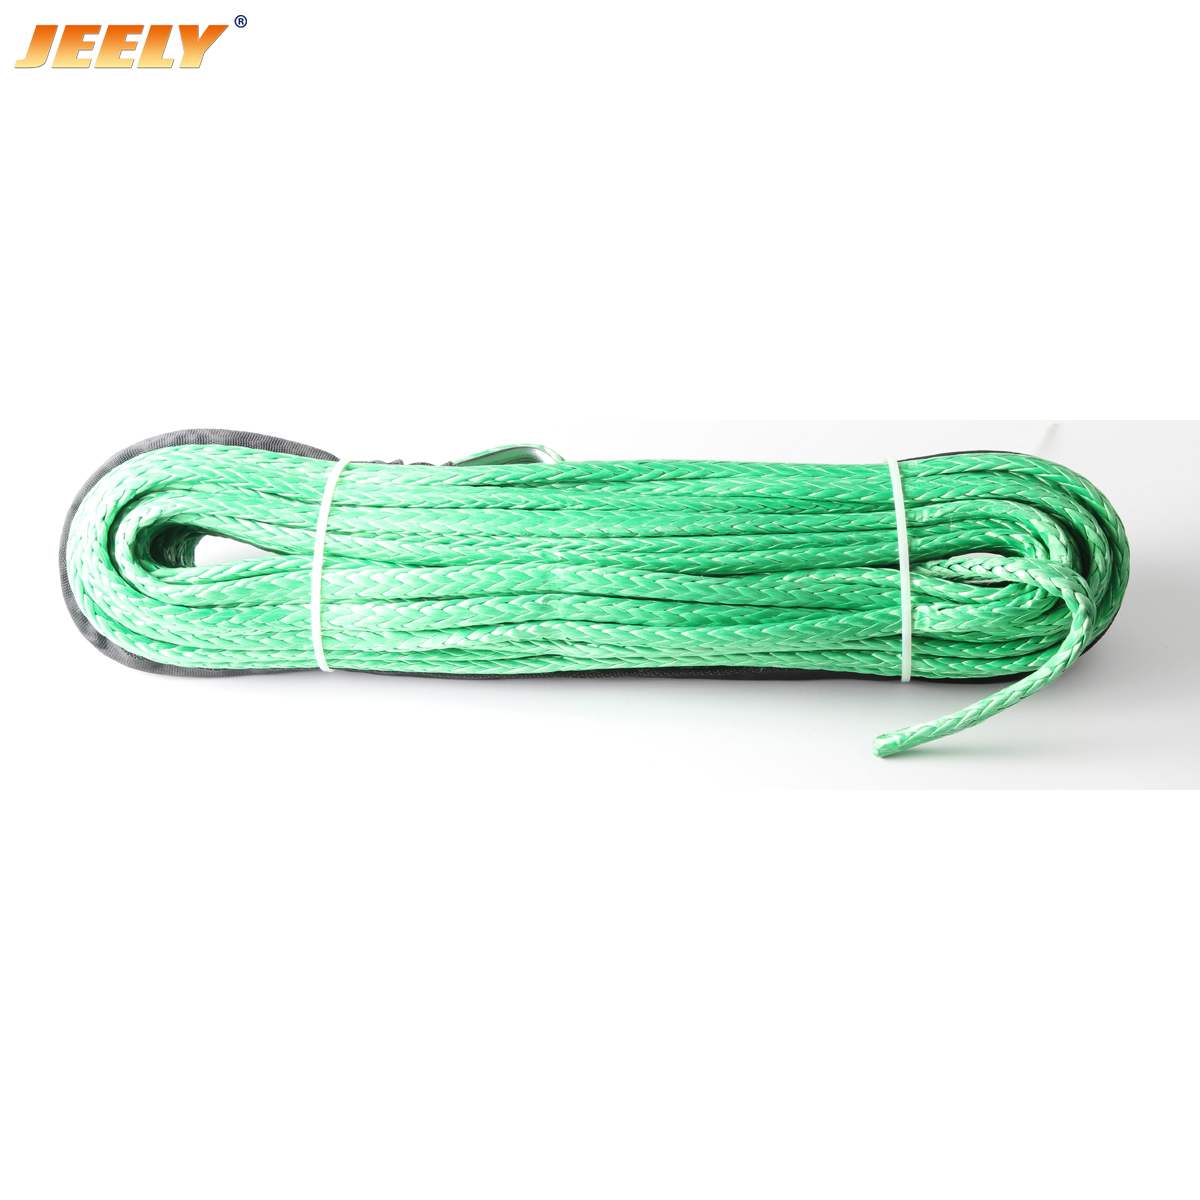 14mm*15m UHMWPE Synthetic Winch Rope 12-strand Braid Winch Cord